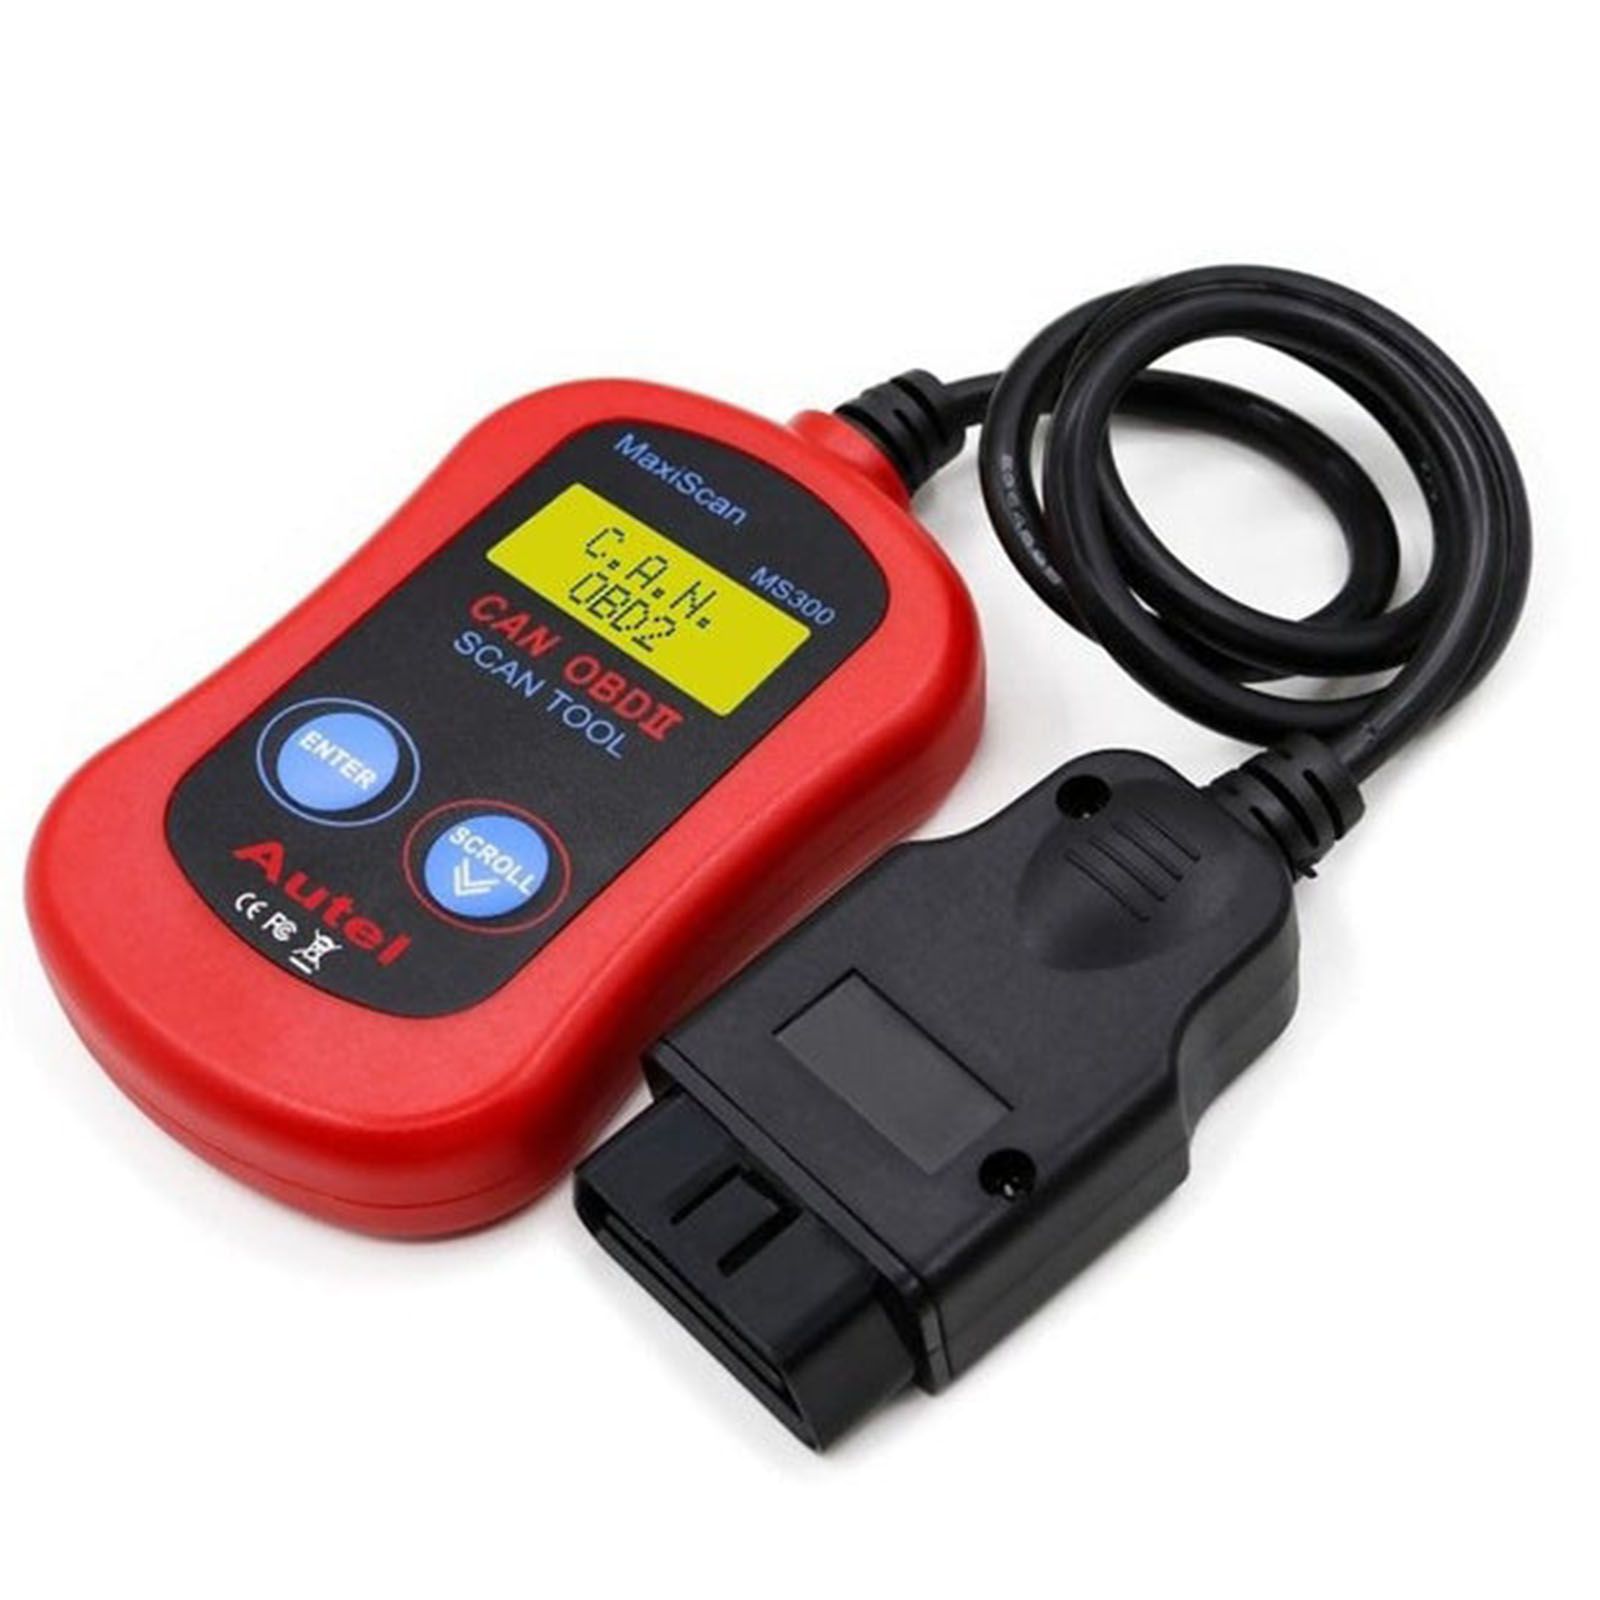 Autel MaxiScan MS300 OBD2 Scanner Car Code Reader, Turn Off Check Engine Light, Read & Erase Fault Codes, Check Emission Monitor Status CAN Vehicles